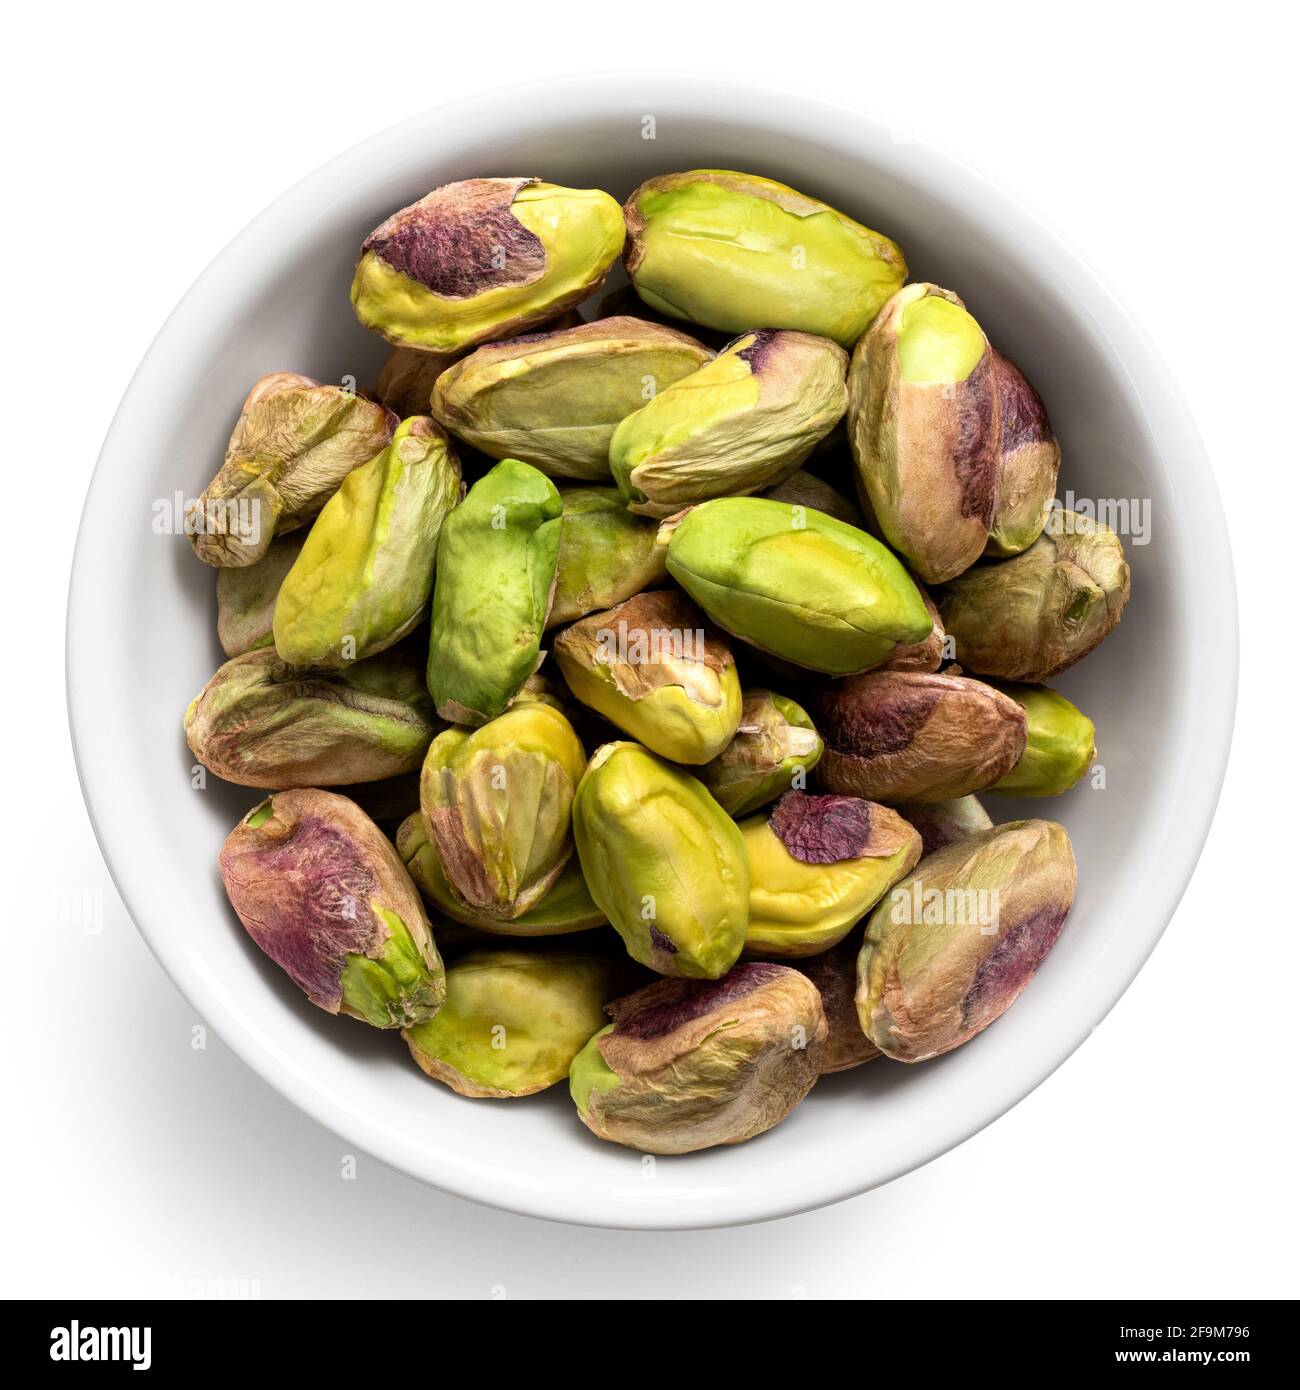 Shelled pistachios in a white ceramic bowl isolated on white. Top view. Stock Photo